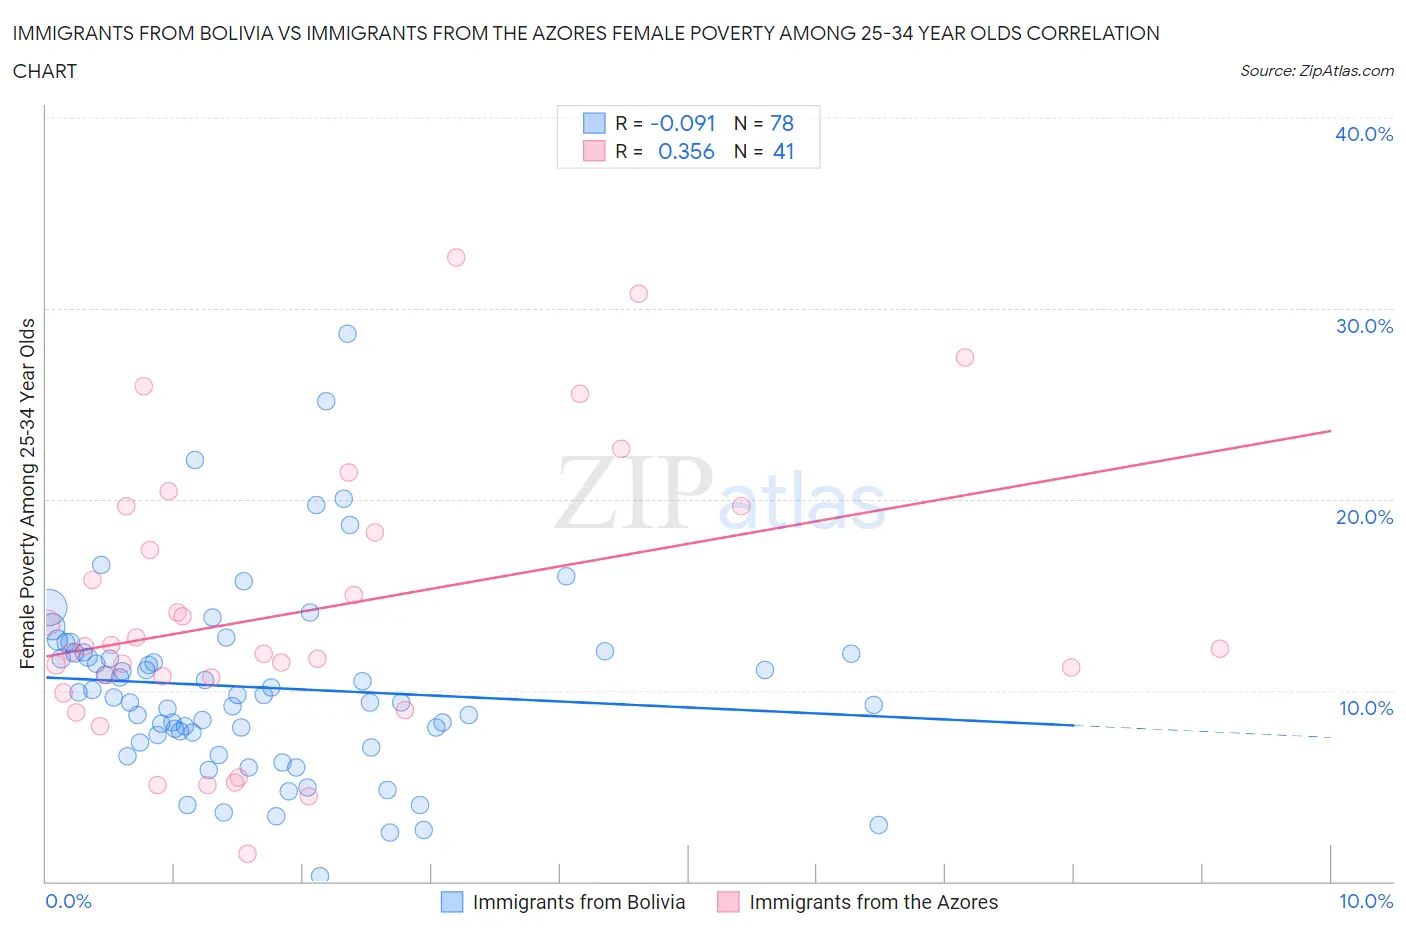 Immigrants from Bolivia vs Immigrants from the Azores Female Poverty Among 25-34 Year Olds